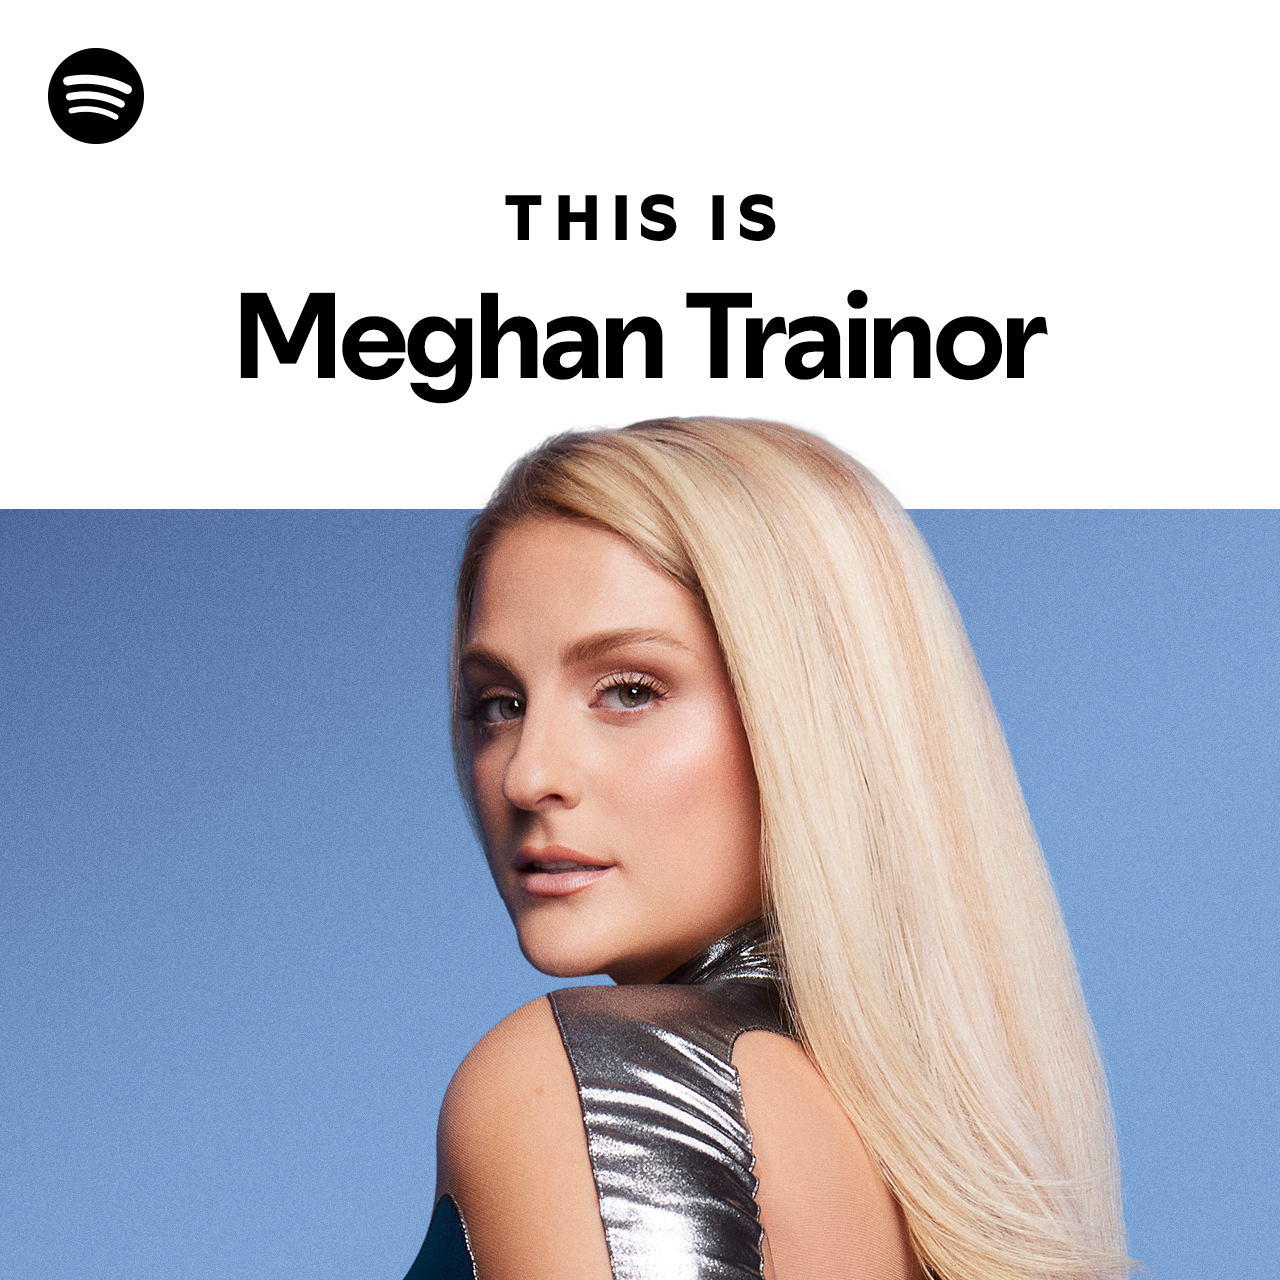 This Is Meghan Trainor - playlist by Spotify